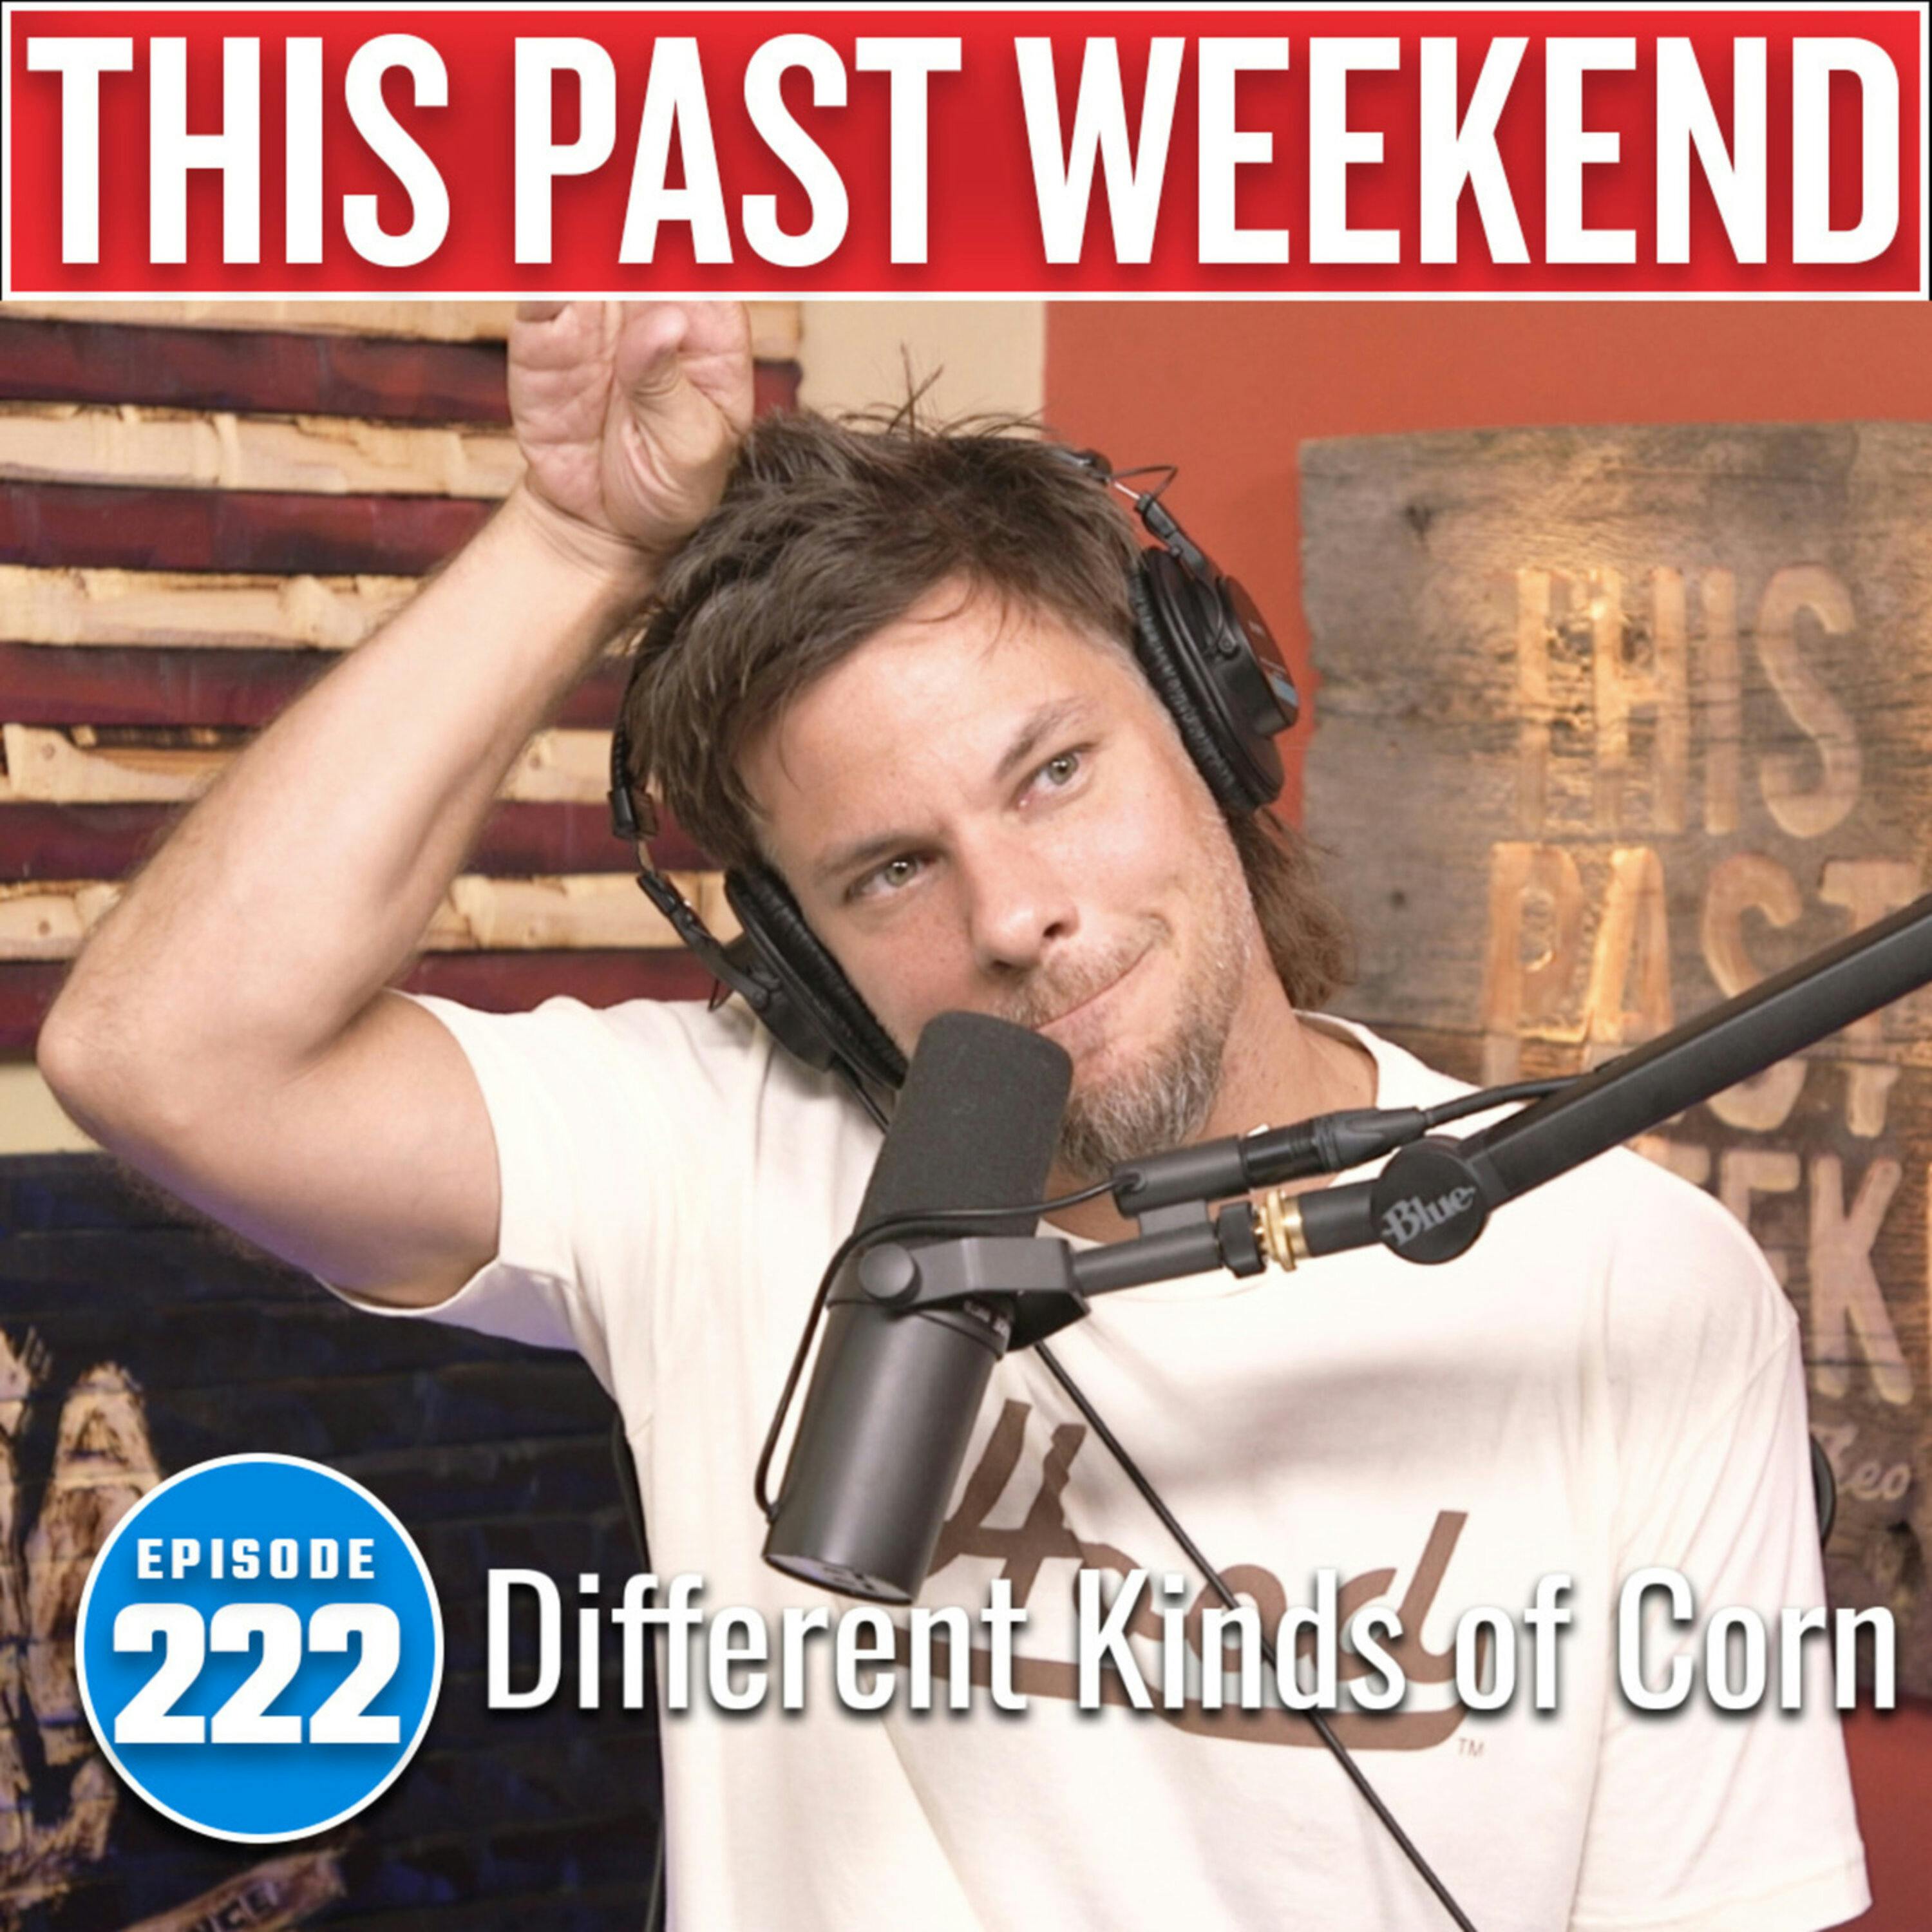 Different Kinds of Corn | This Past Weekend #222 by Theo Von